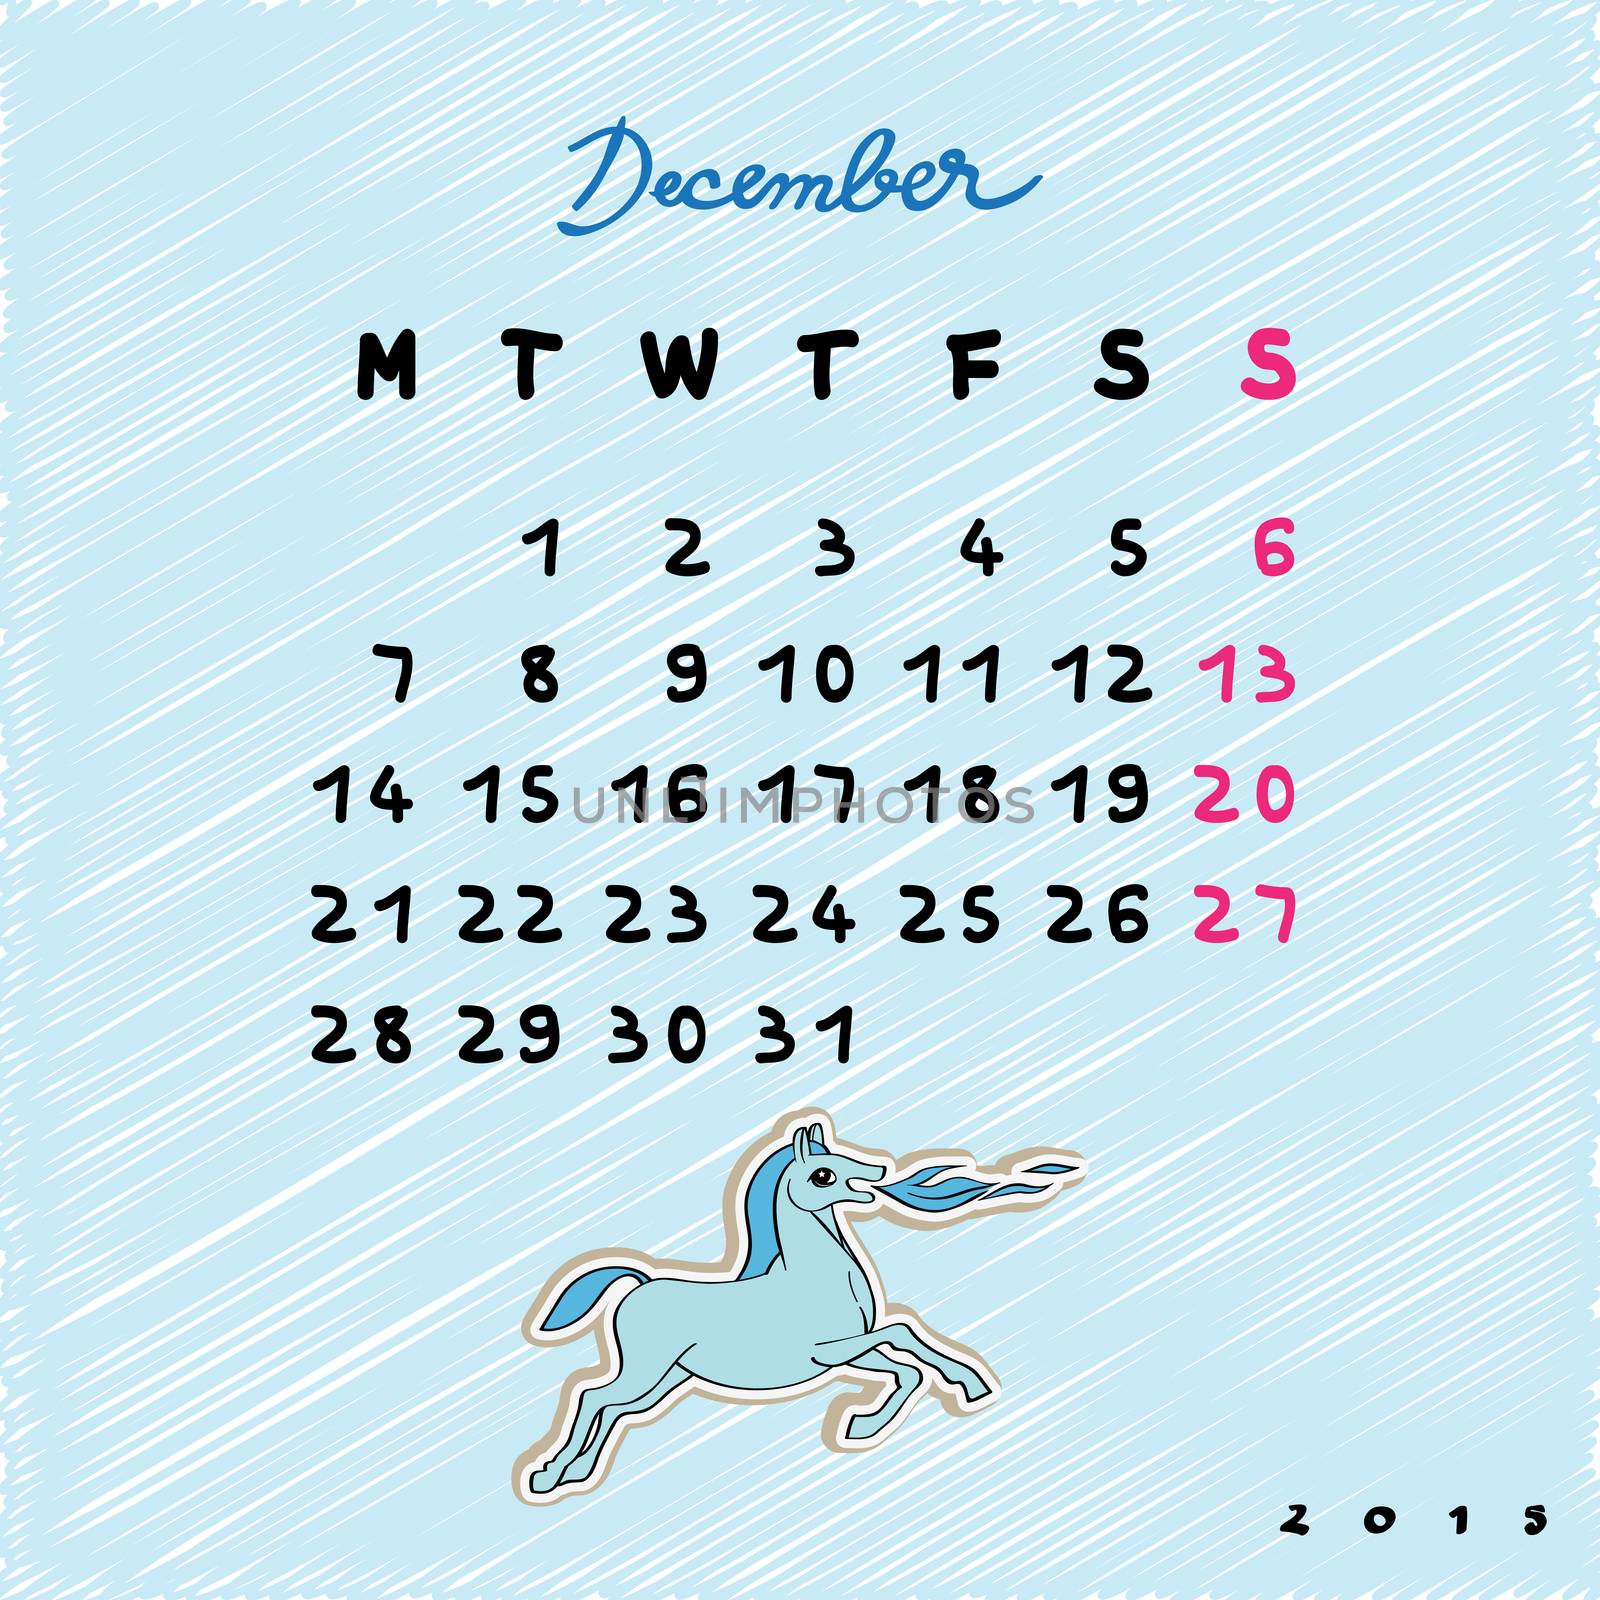 Calendar 2015 with toy horse, graphic illustration of December month calendar with original hand drawn text